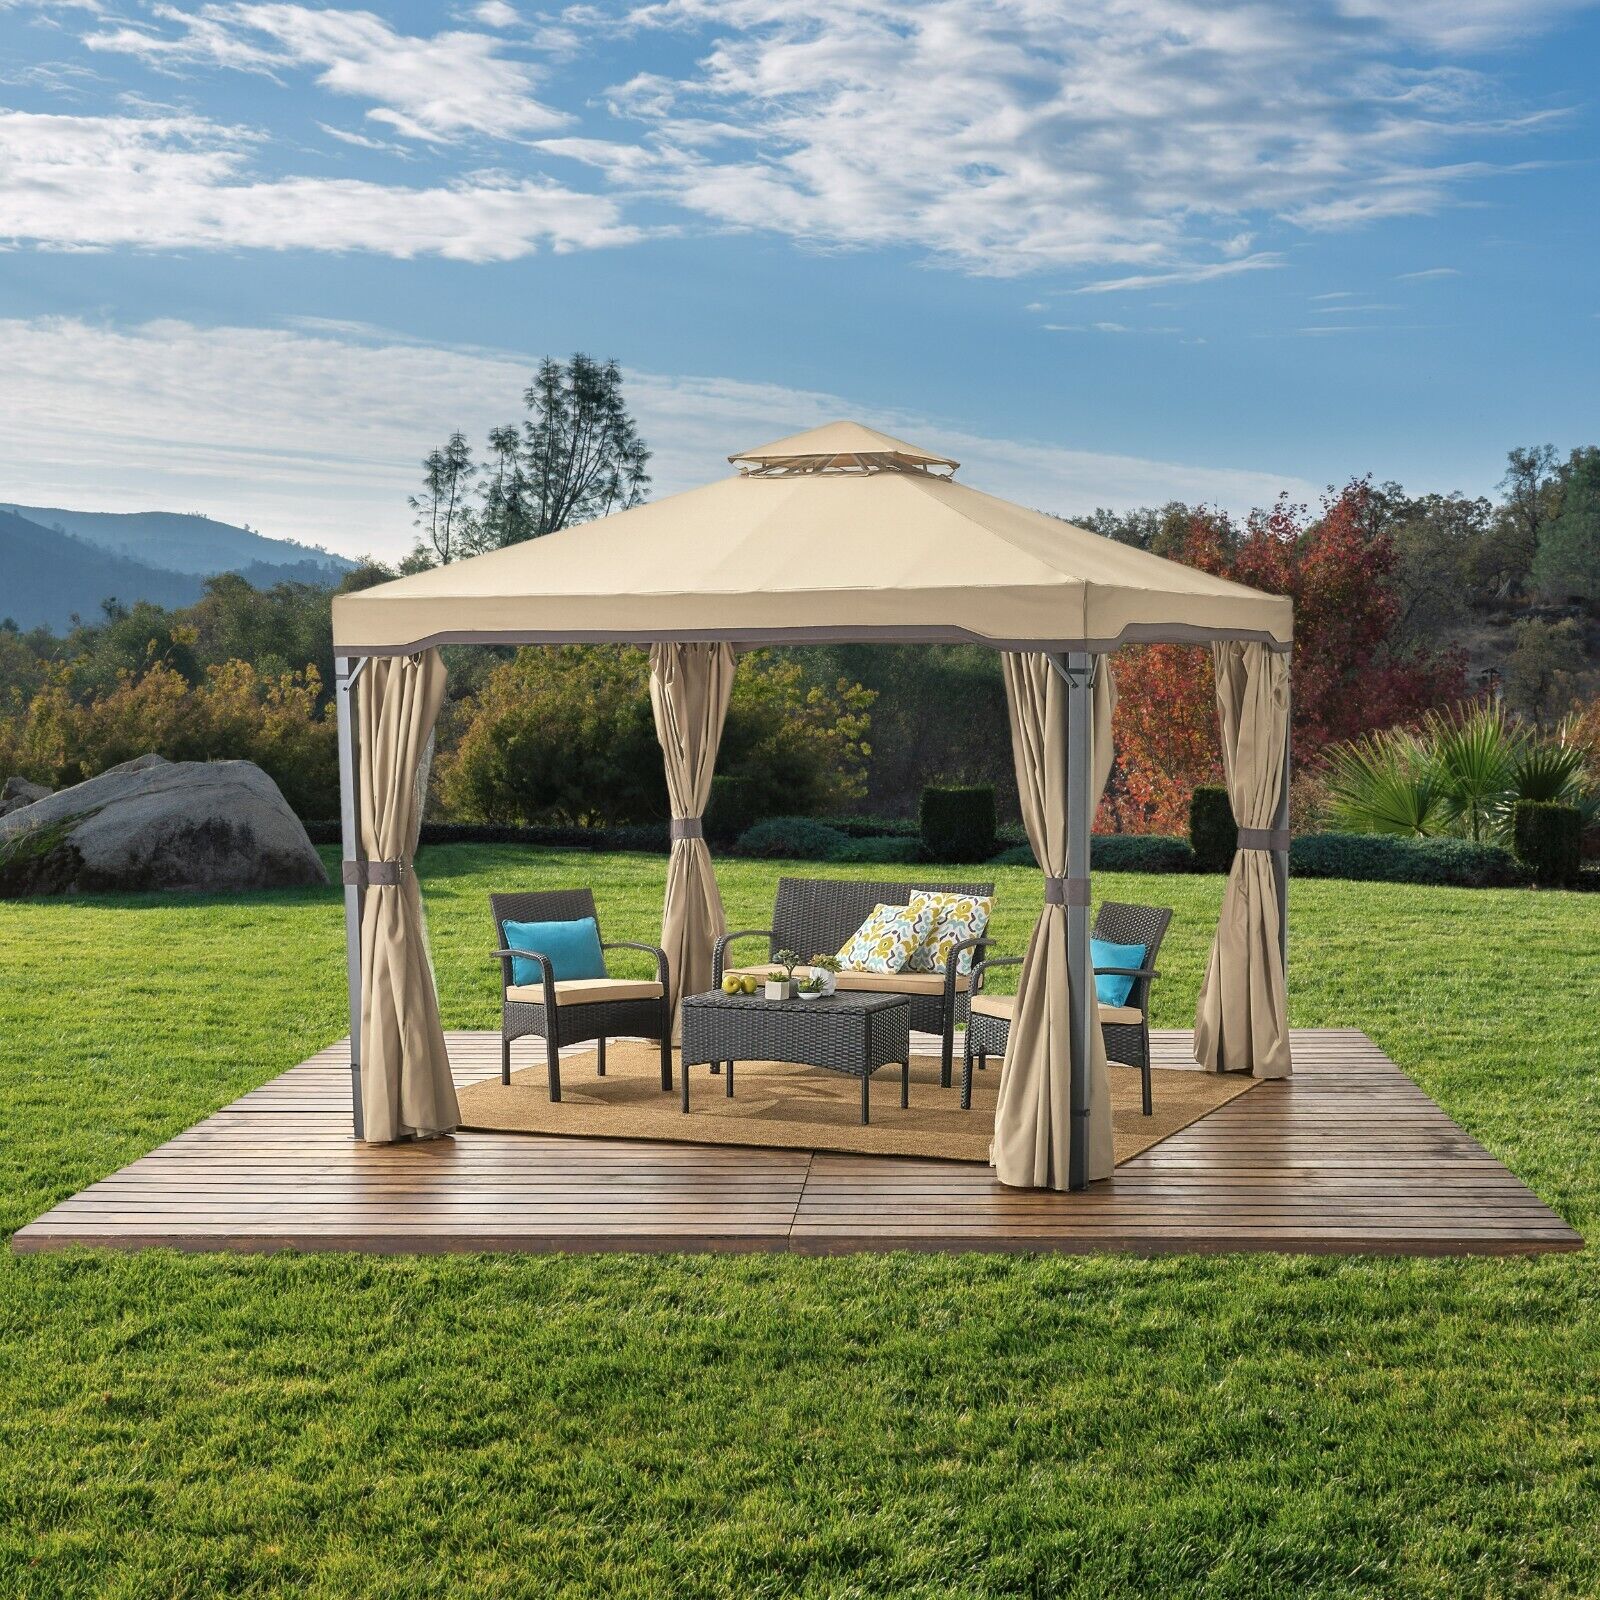 Sonoma Outdoor Traditional Brown Steel Gazebo Canopy with Water-Resistant Cover